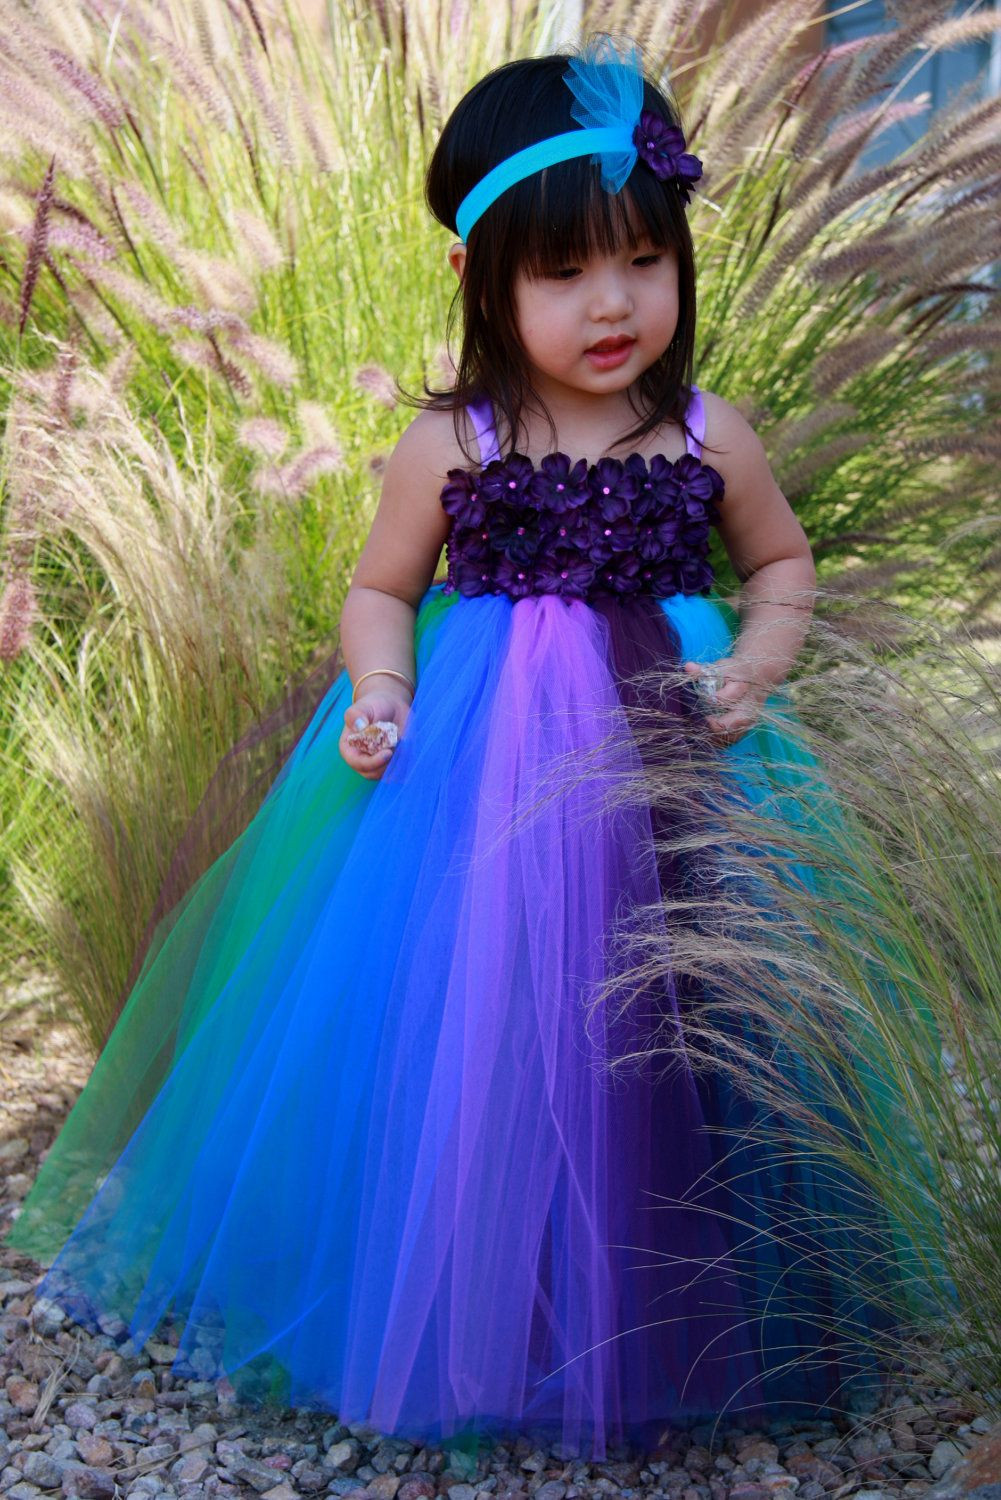 Tulle Dress Toddler DIY
 Peacock Inspired Tutu Dress Series IV by giselleboutique